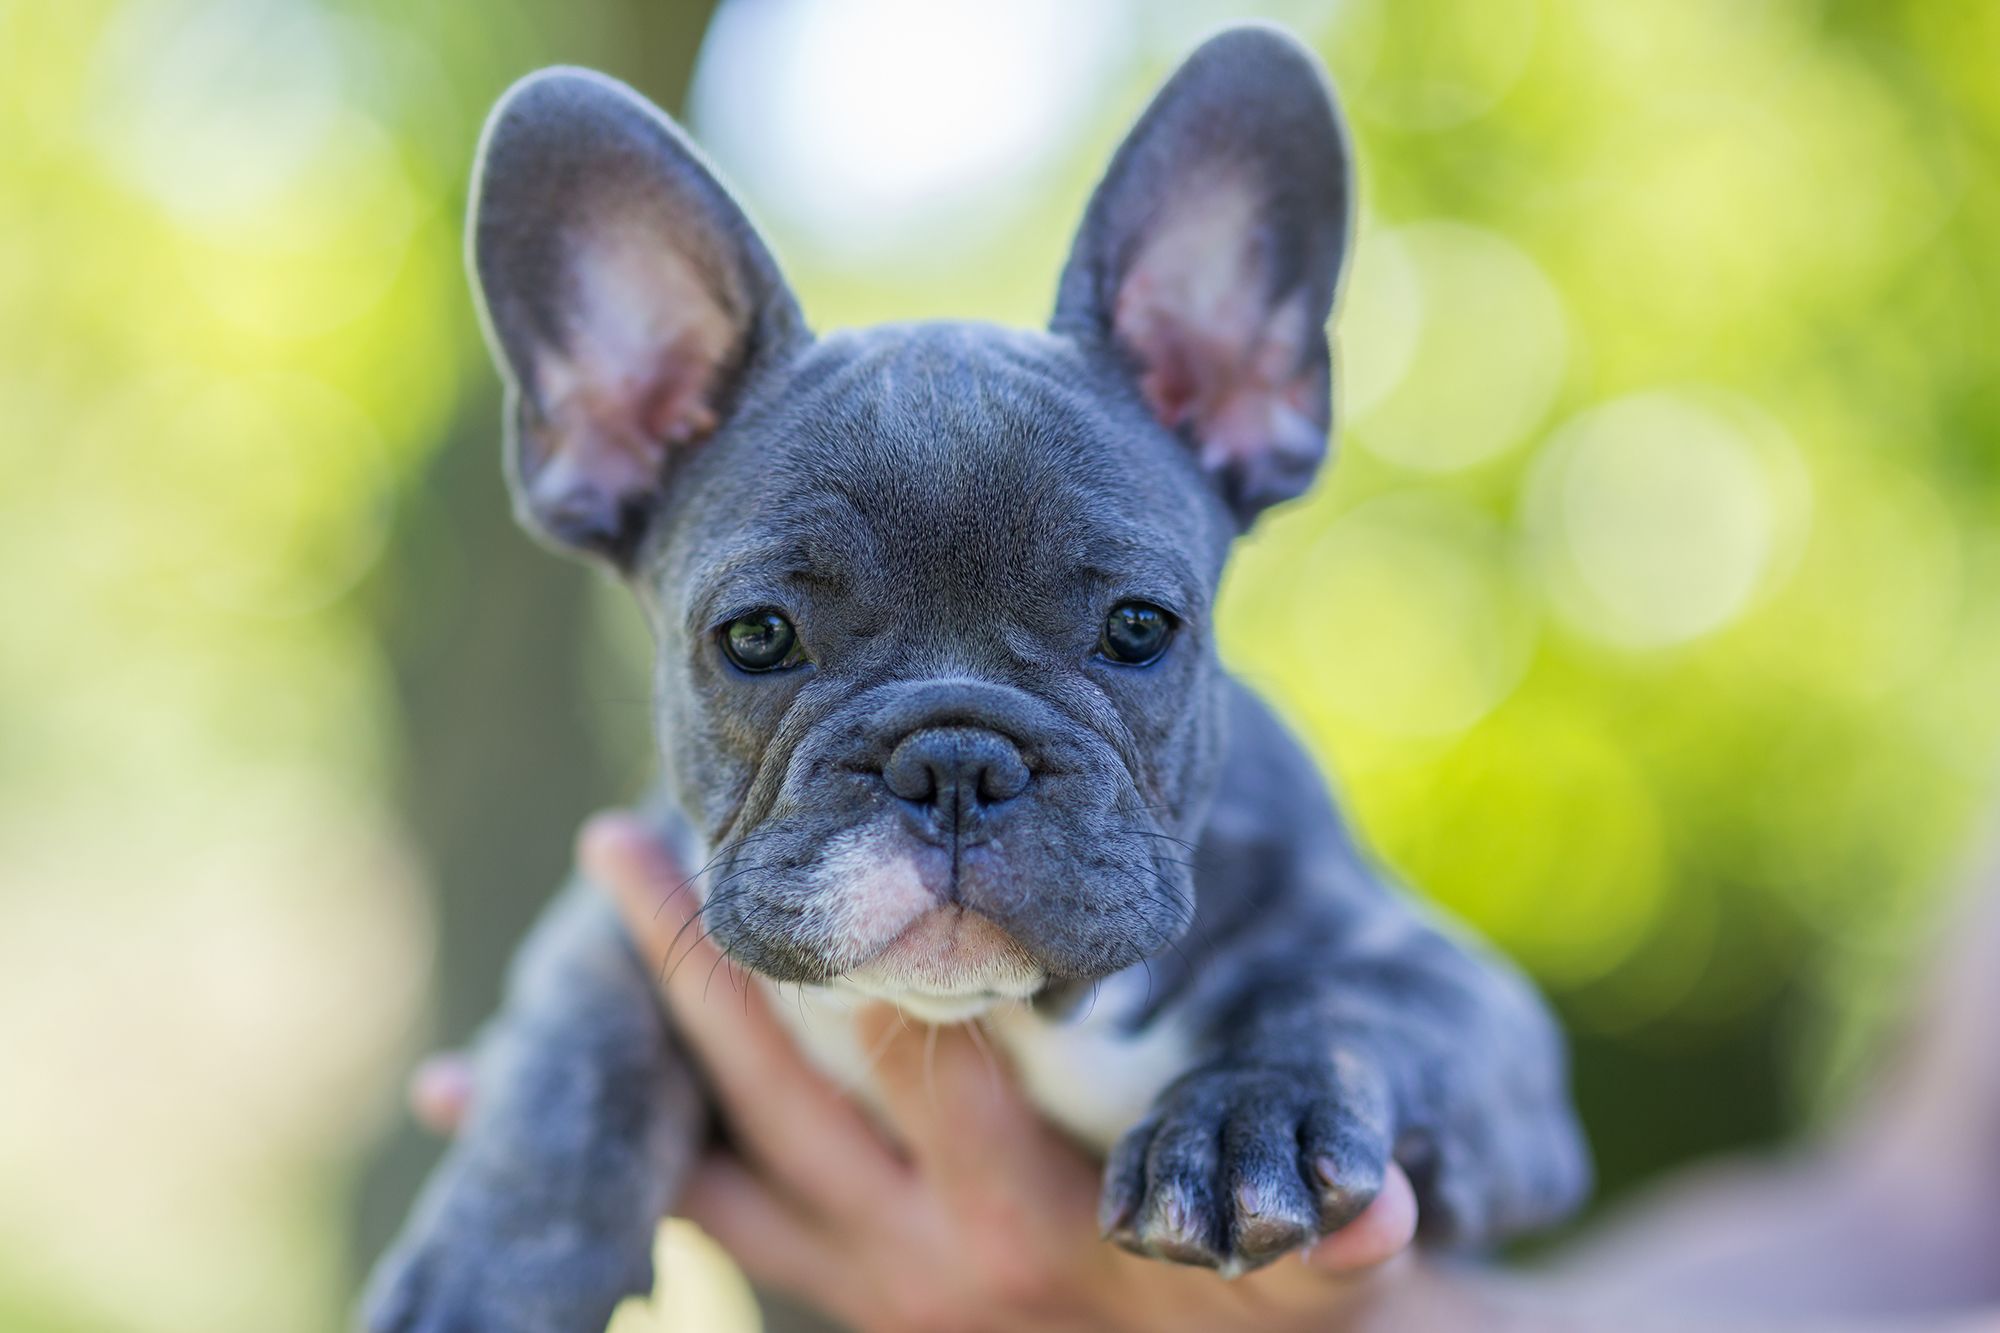 French Bulldog: The Smallest and Cutest Dog Breed in the World